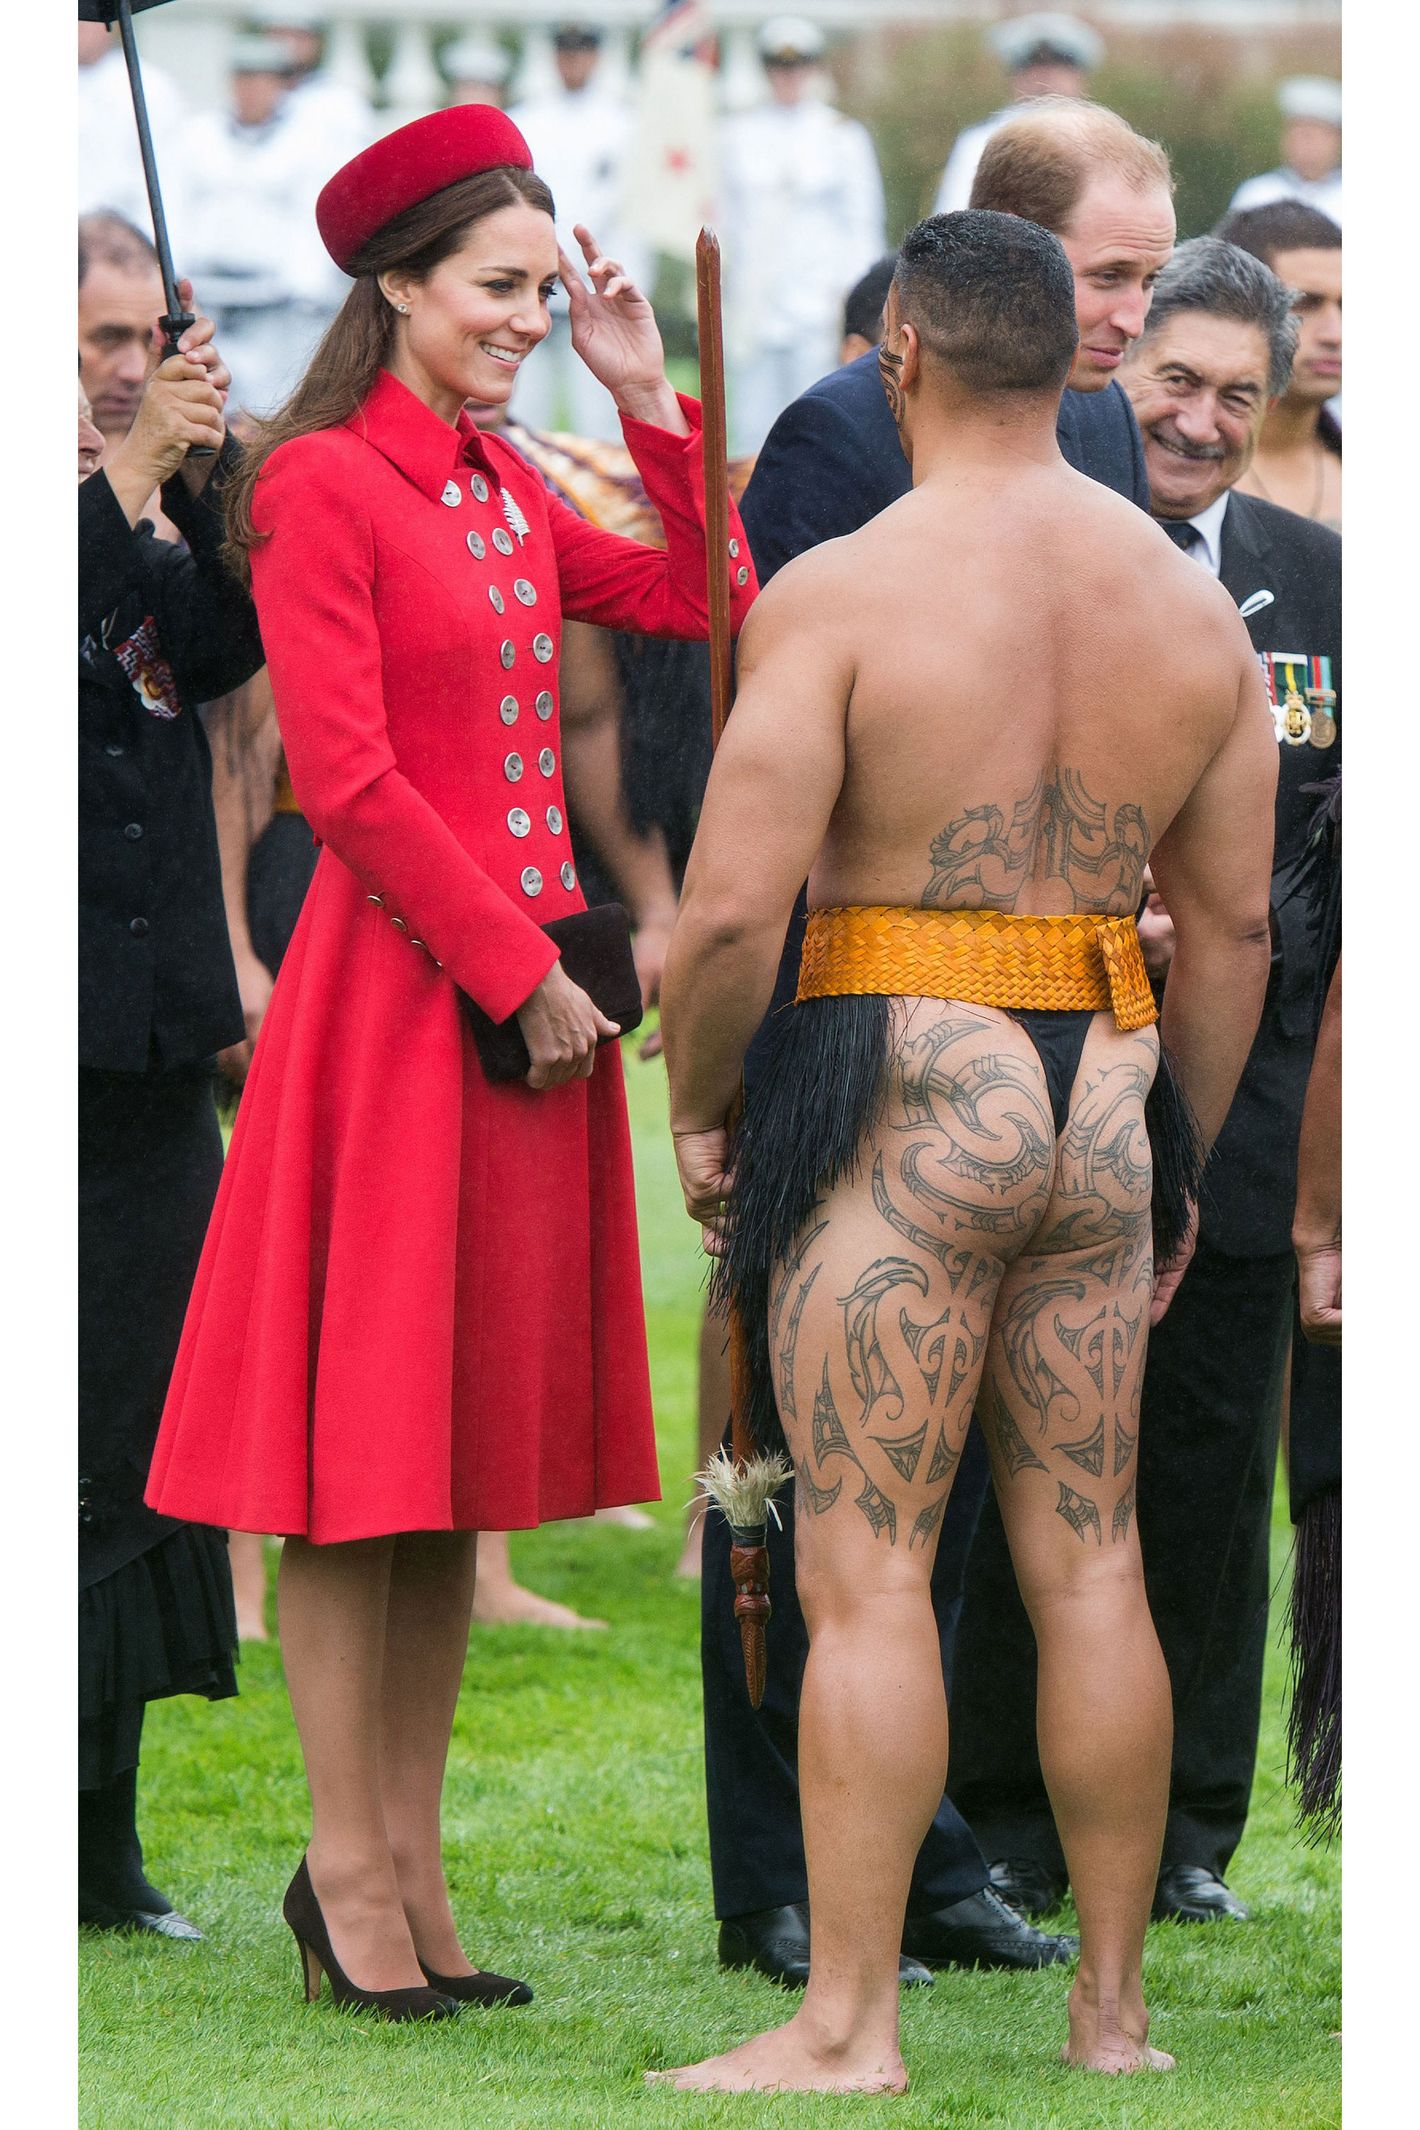 Debunking Rumors No Kate Middleton Does Not Have a Tattoo